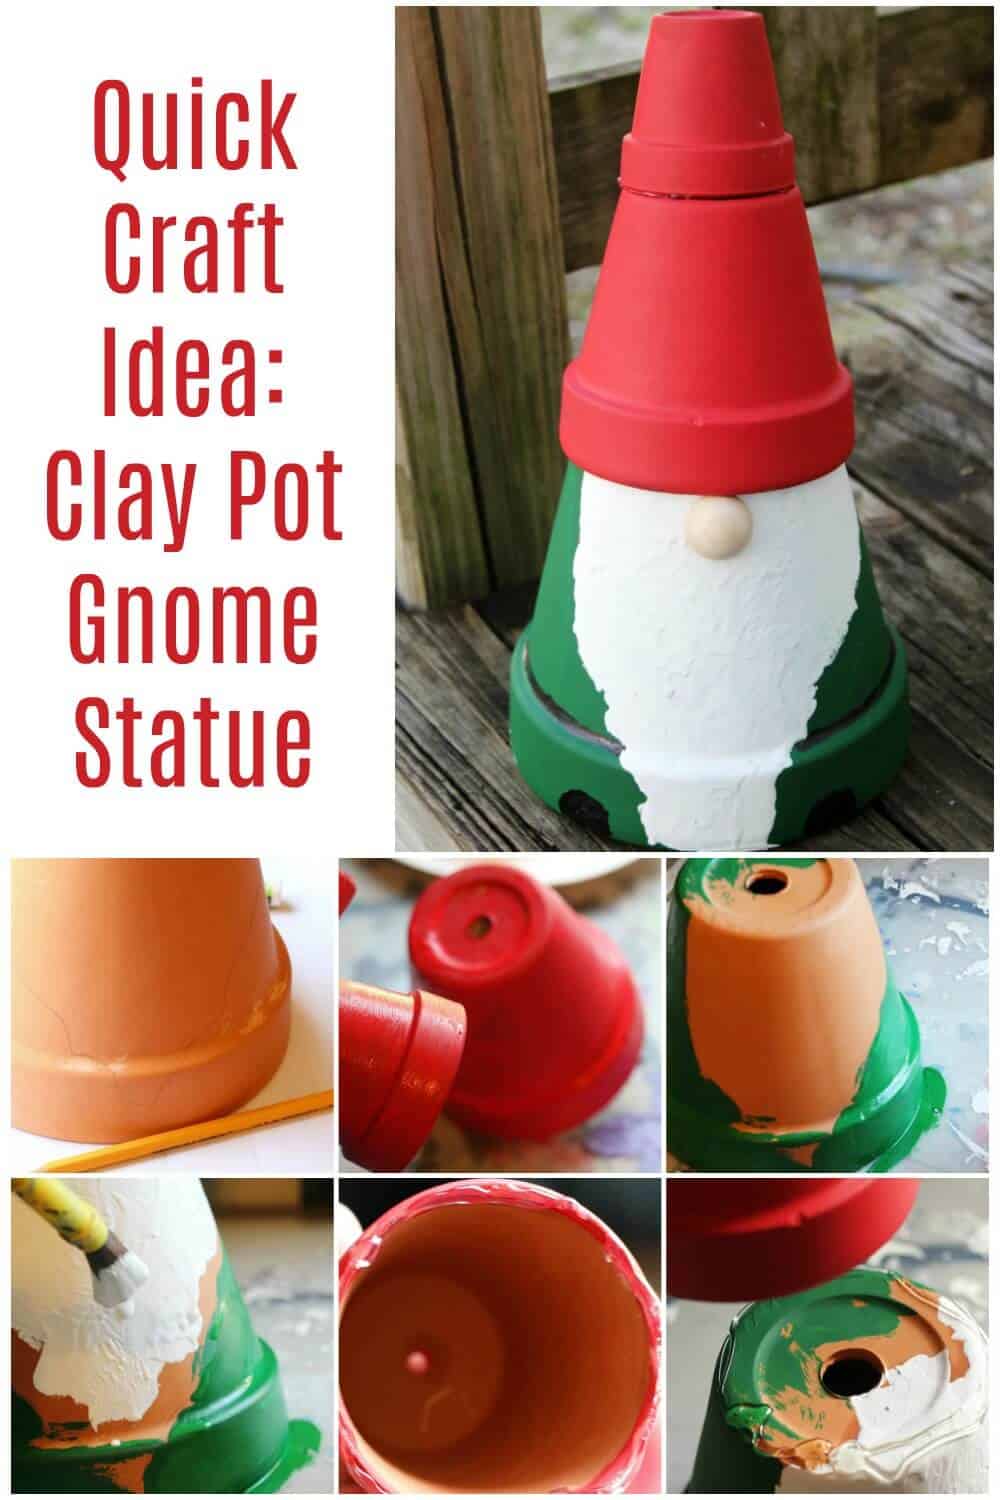 photo collage of quick crafts for spring clay pot gnome and photo tutorial of making a clay pot gnome craft with text which reads quick craft idea: clay pot gnome statue